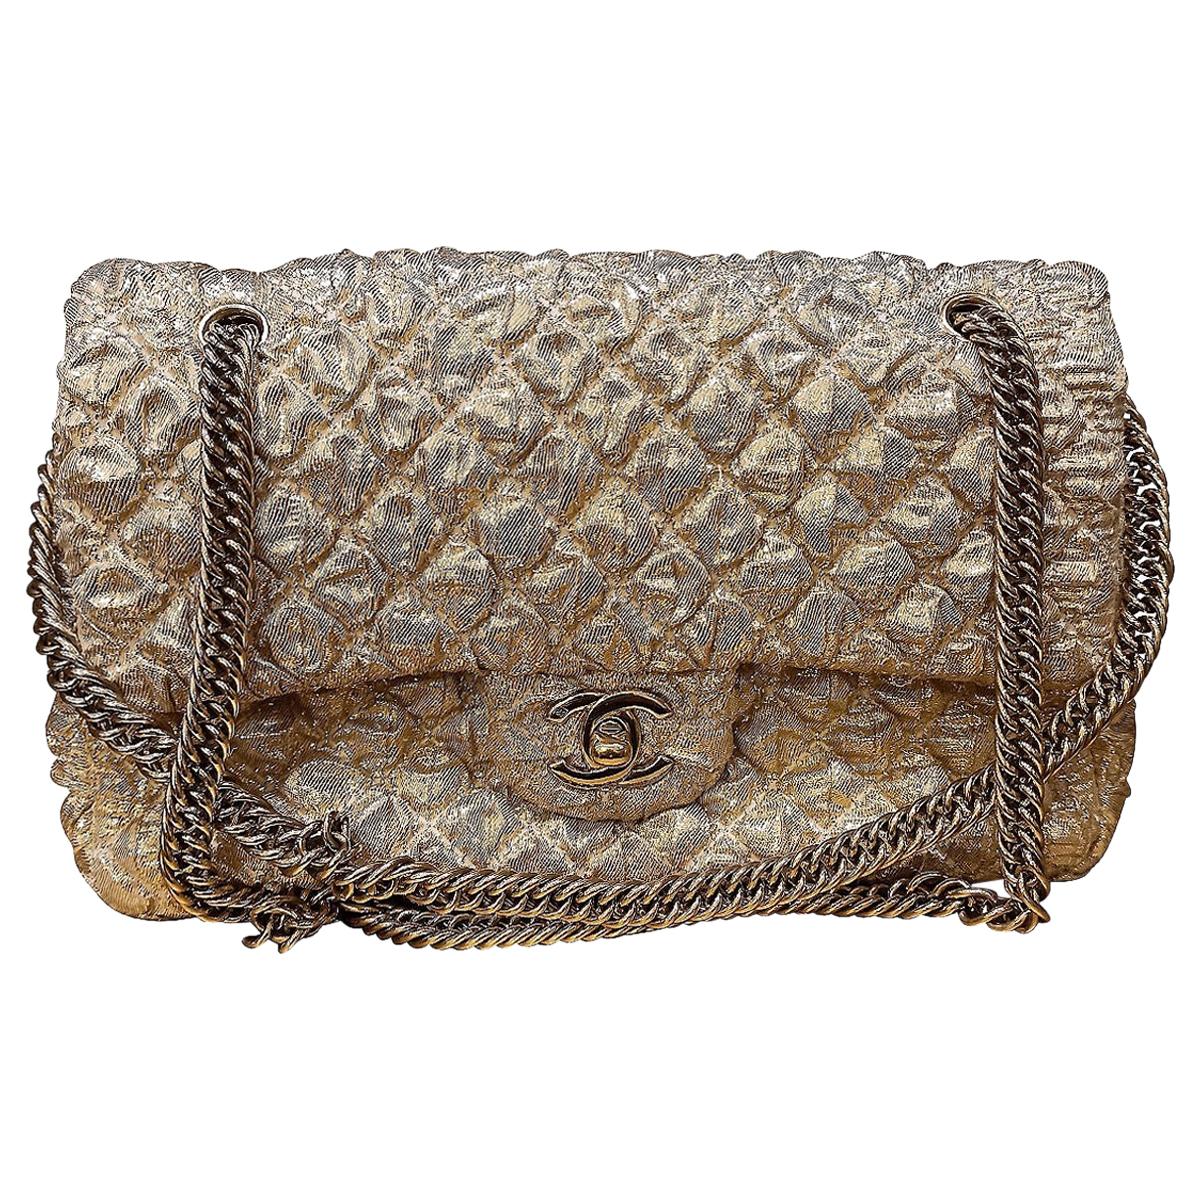 Chanel Gold Limited Edition Lamé Bag